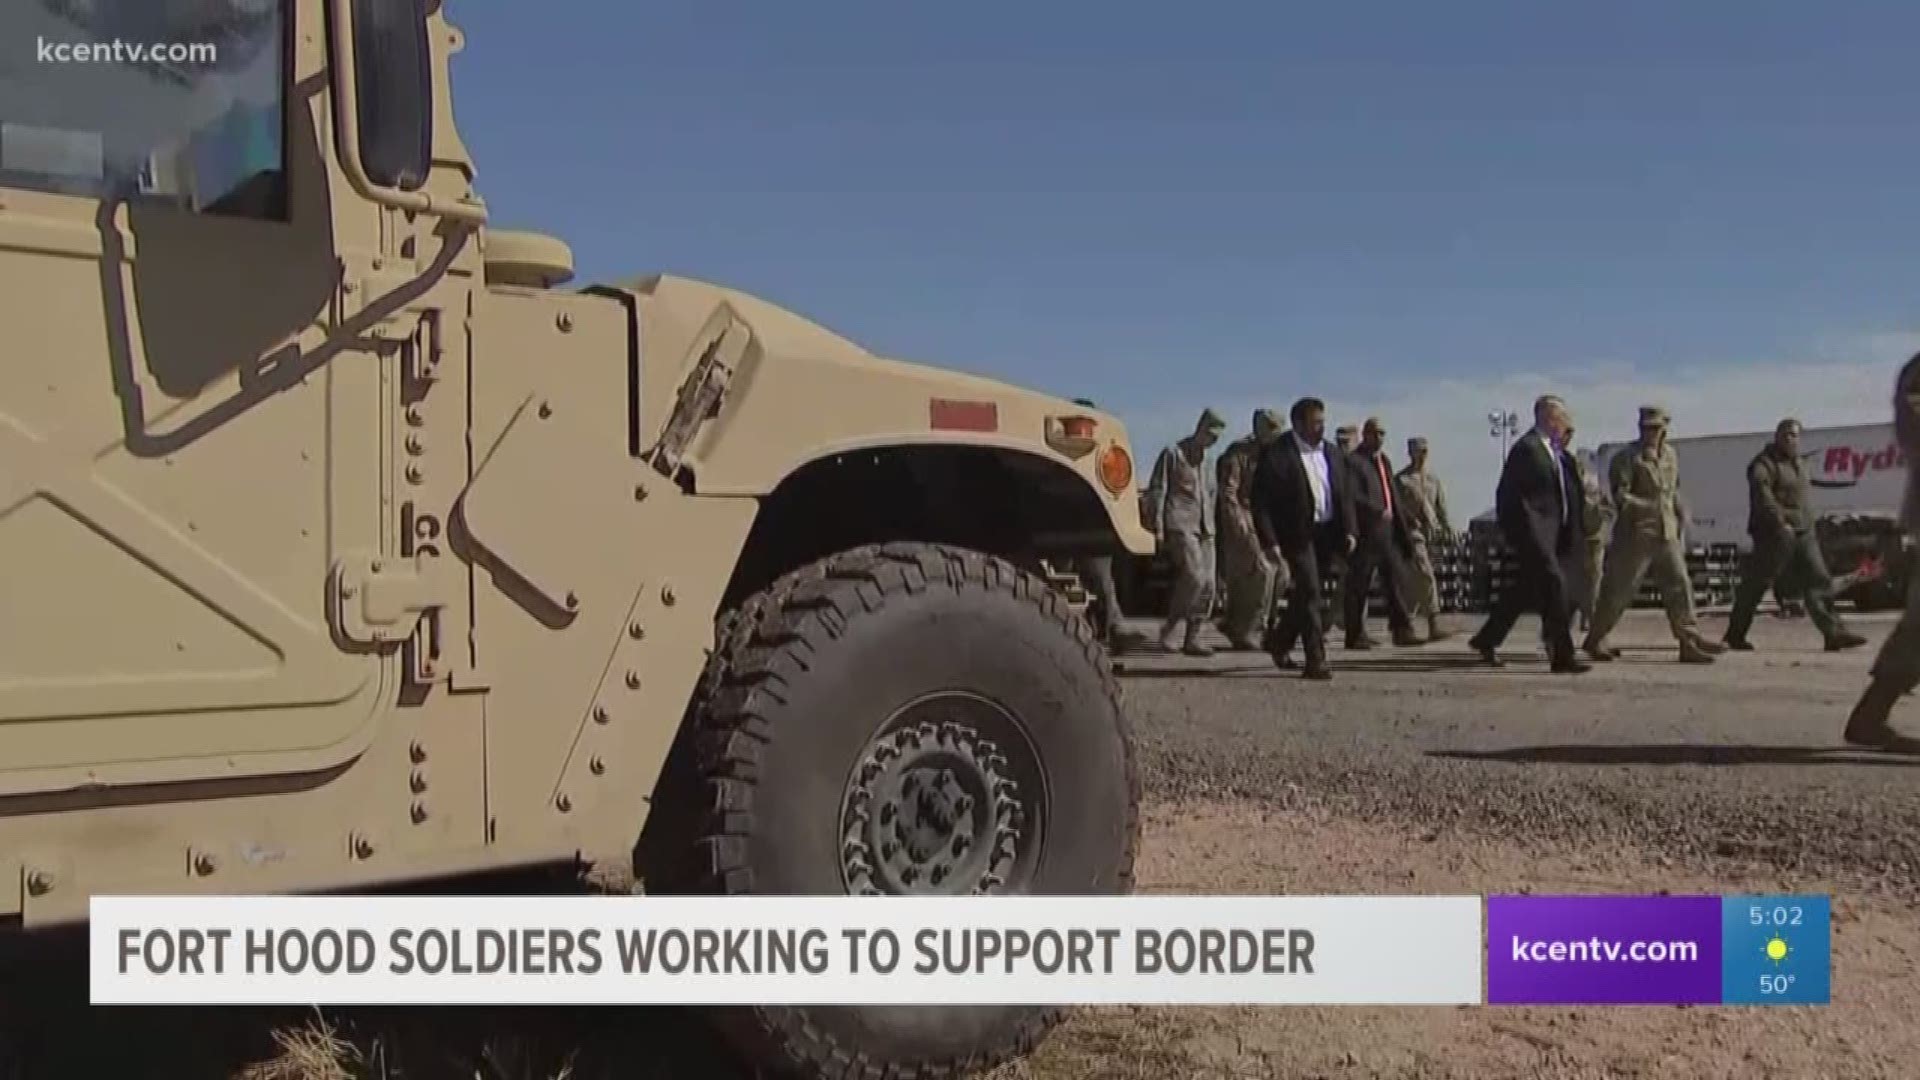 Fort Hood soldiers working to support border